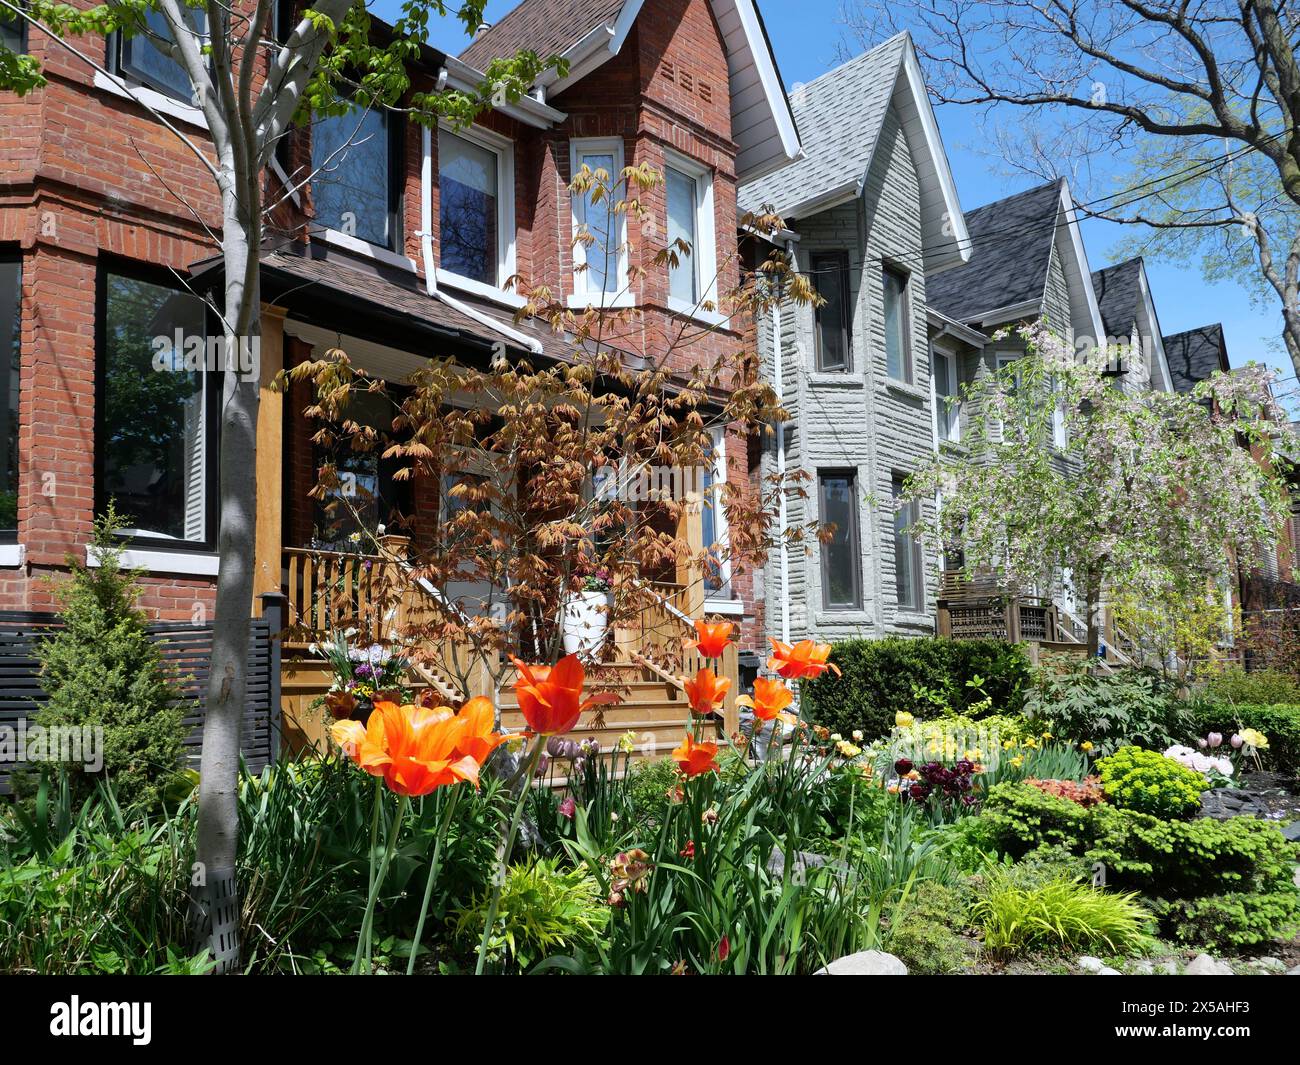 Residential neighborhood with tall narrow houses with gables and garden with spring flowers Stock Photo